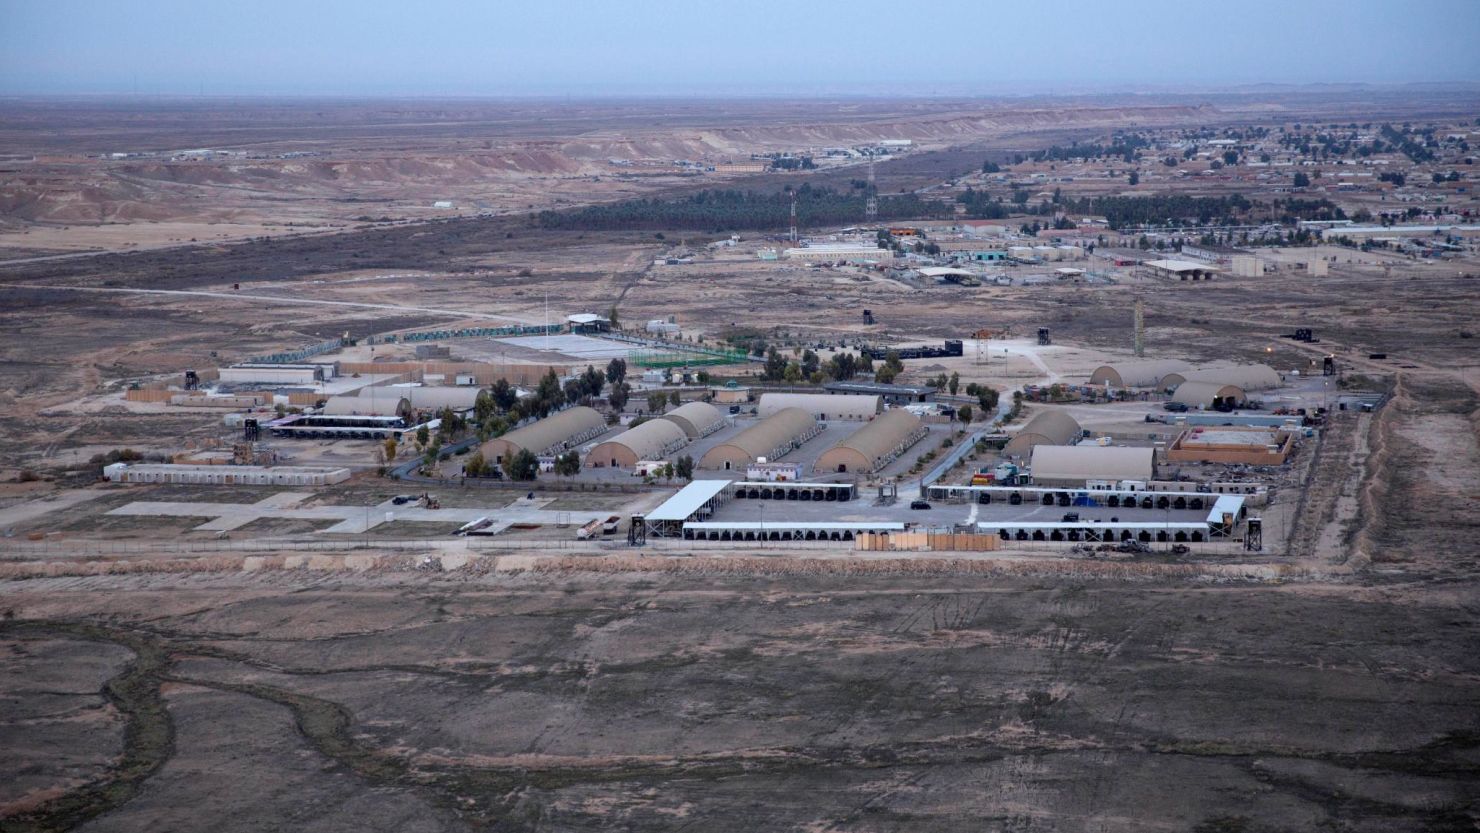  Al-Asad Airbase, one of the largest and oldest military bases in Iraq, pictured in a 2019 aerial photo.